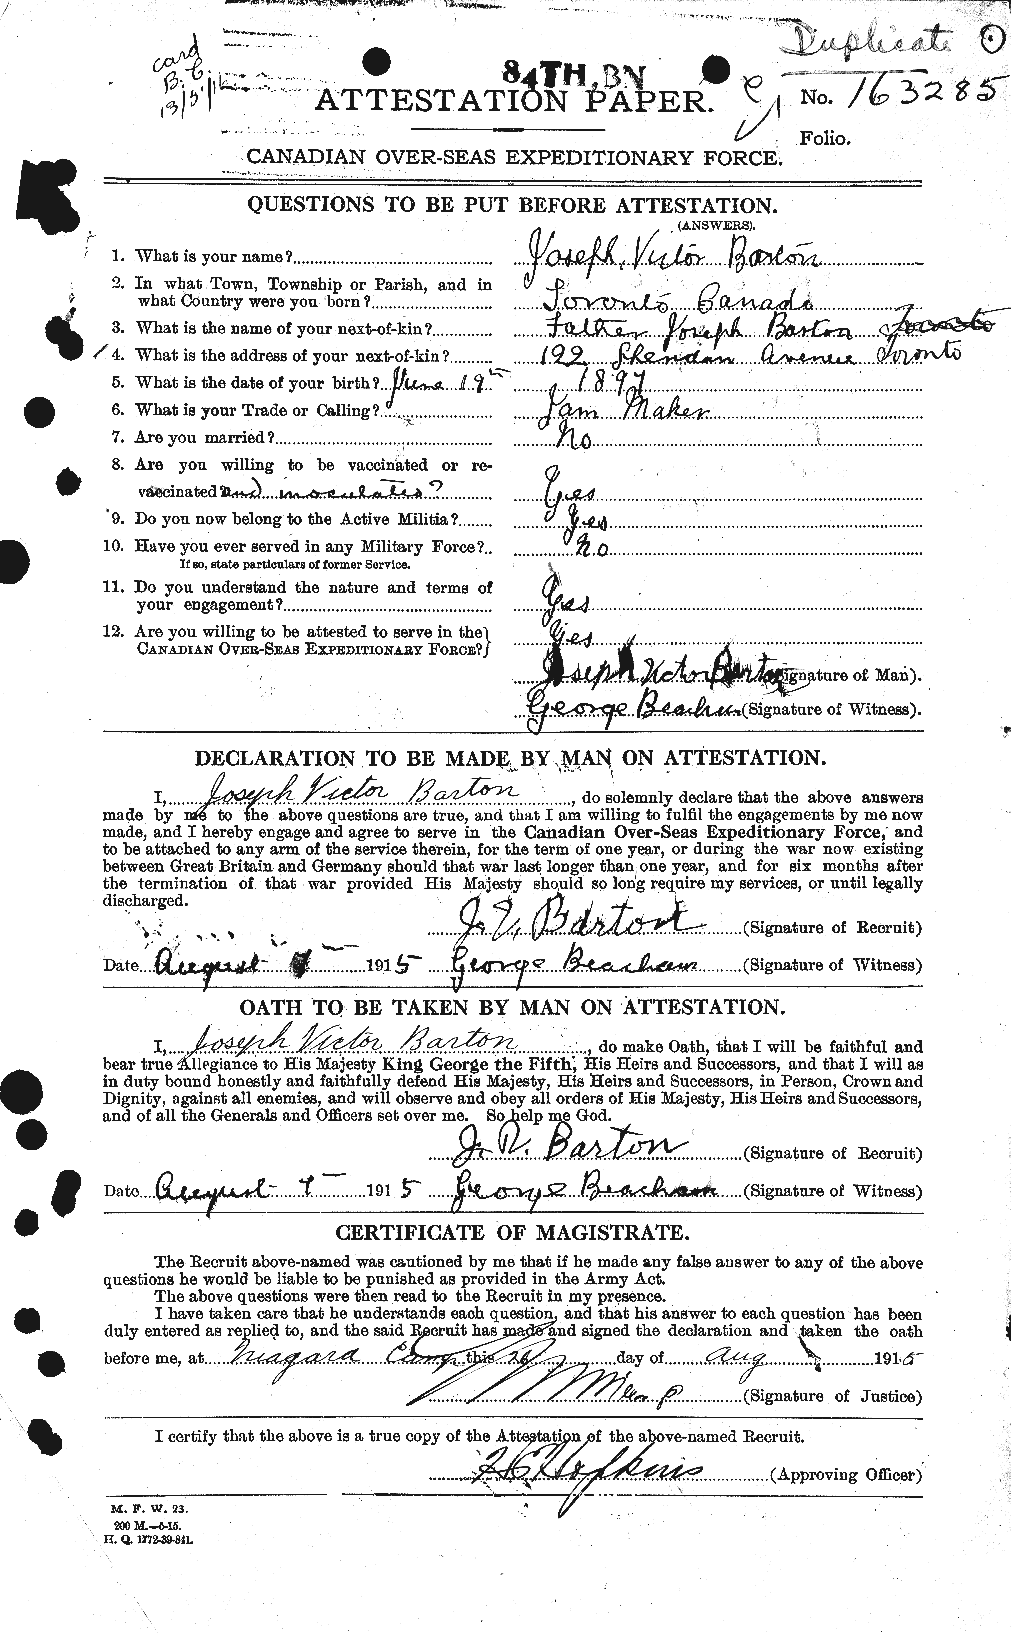 Personnel Records of the First World War - CEF 221382a